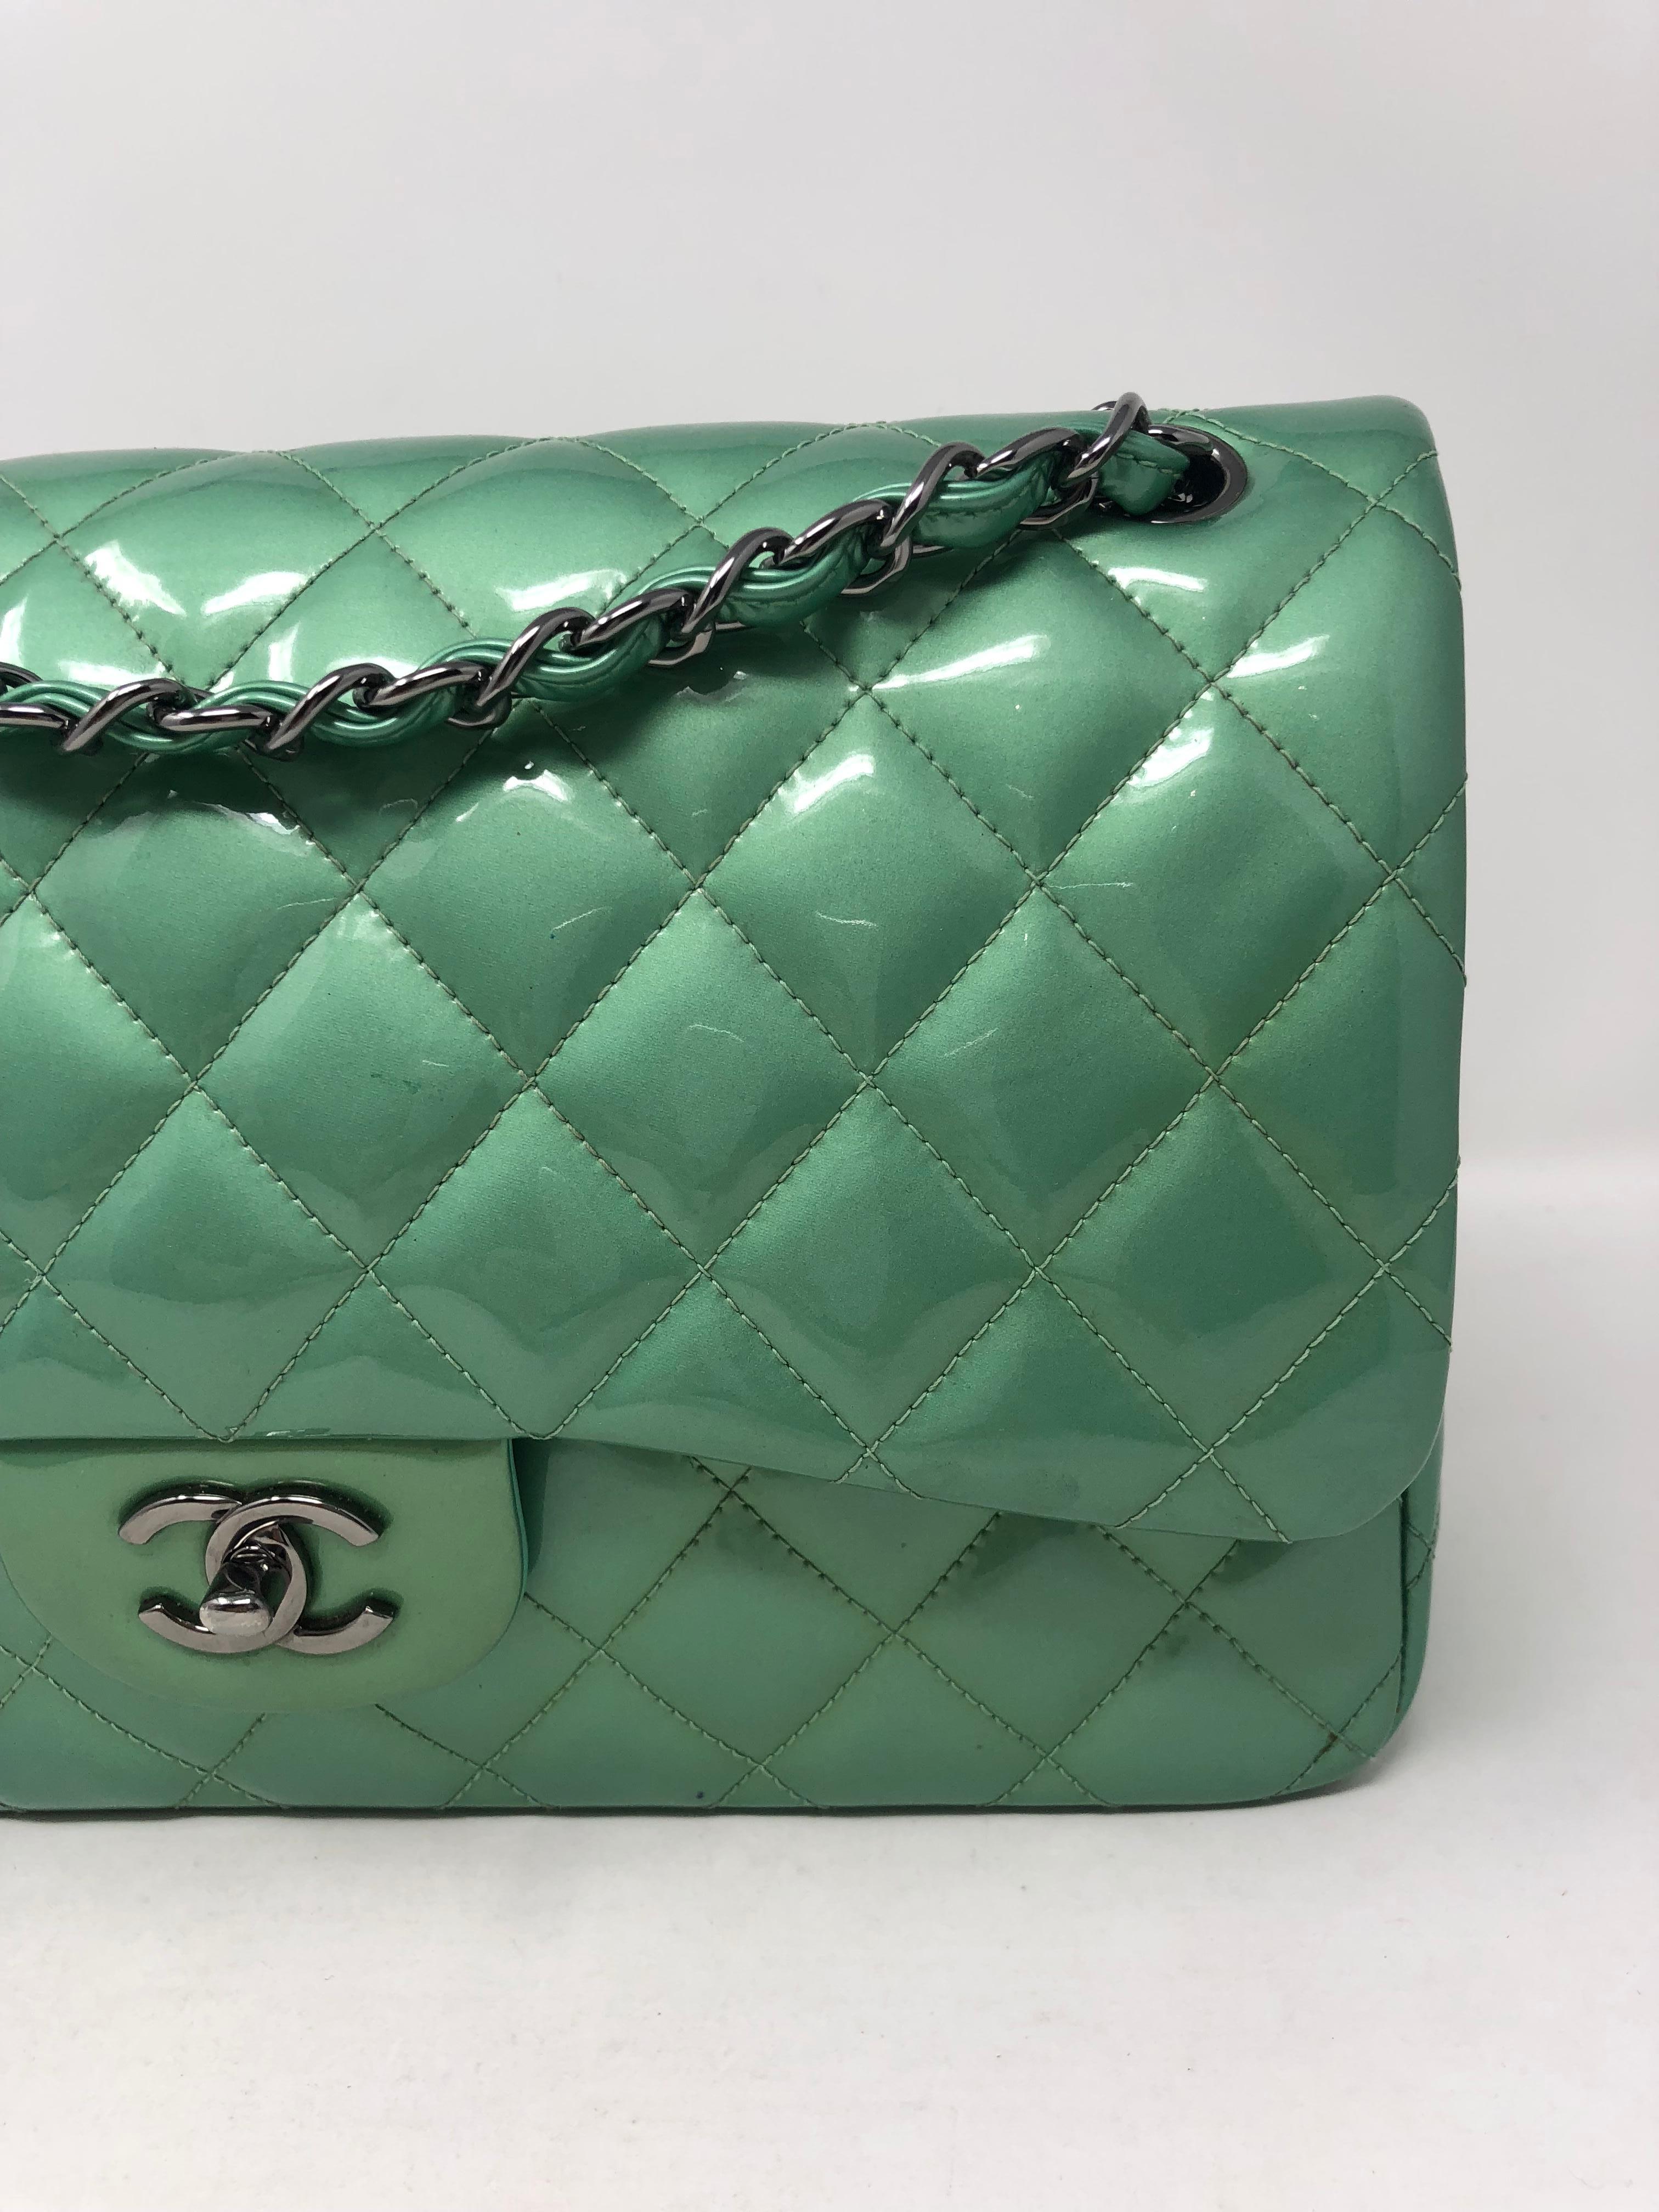 Gray Chanel Green Menthe Patent Jumbo double flap bag